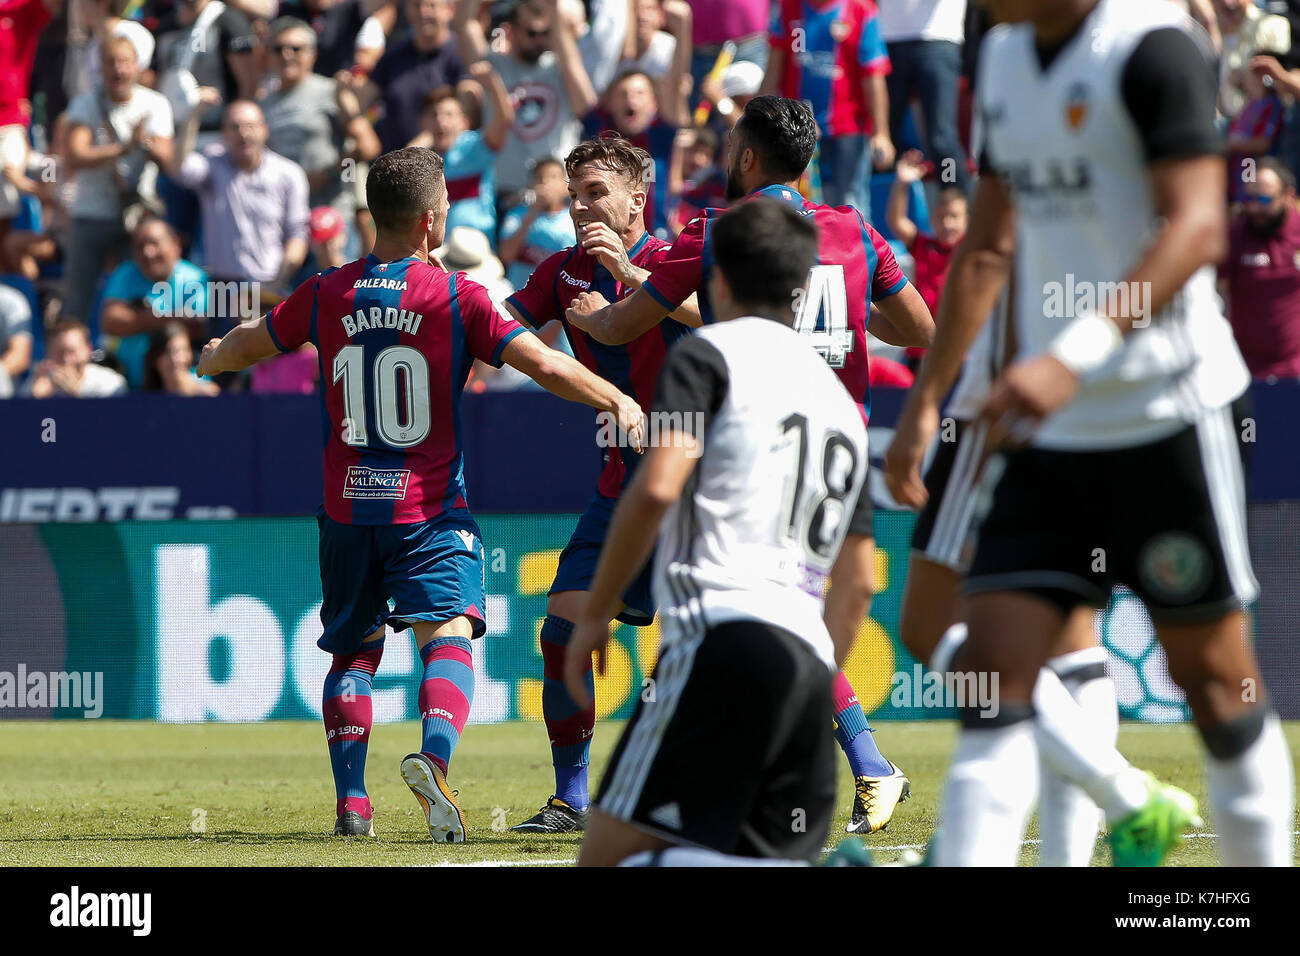 10 Enis Bardhi of Levante Ud (L) celebrate after scoring the 1-1 goal ...